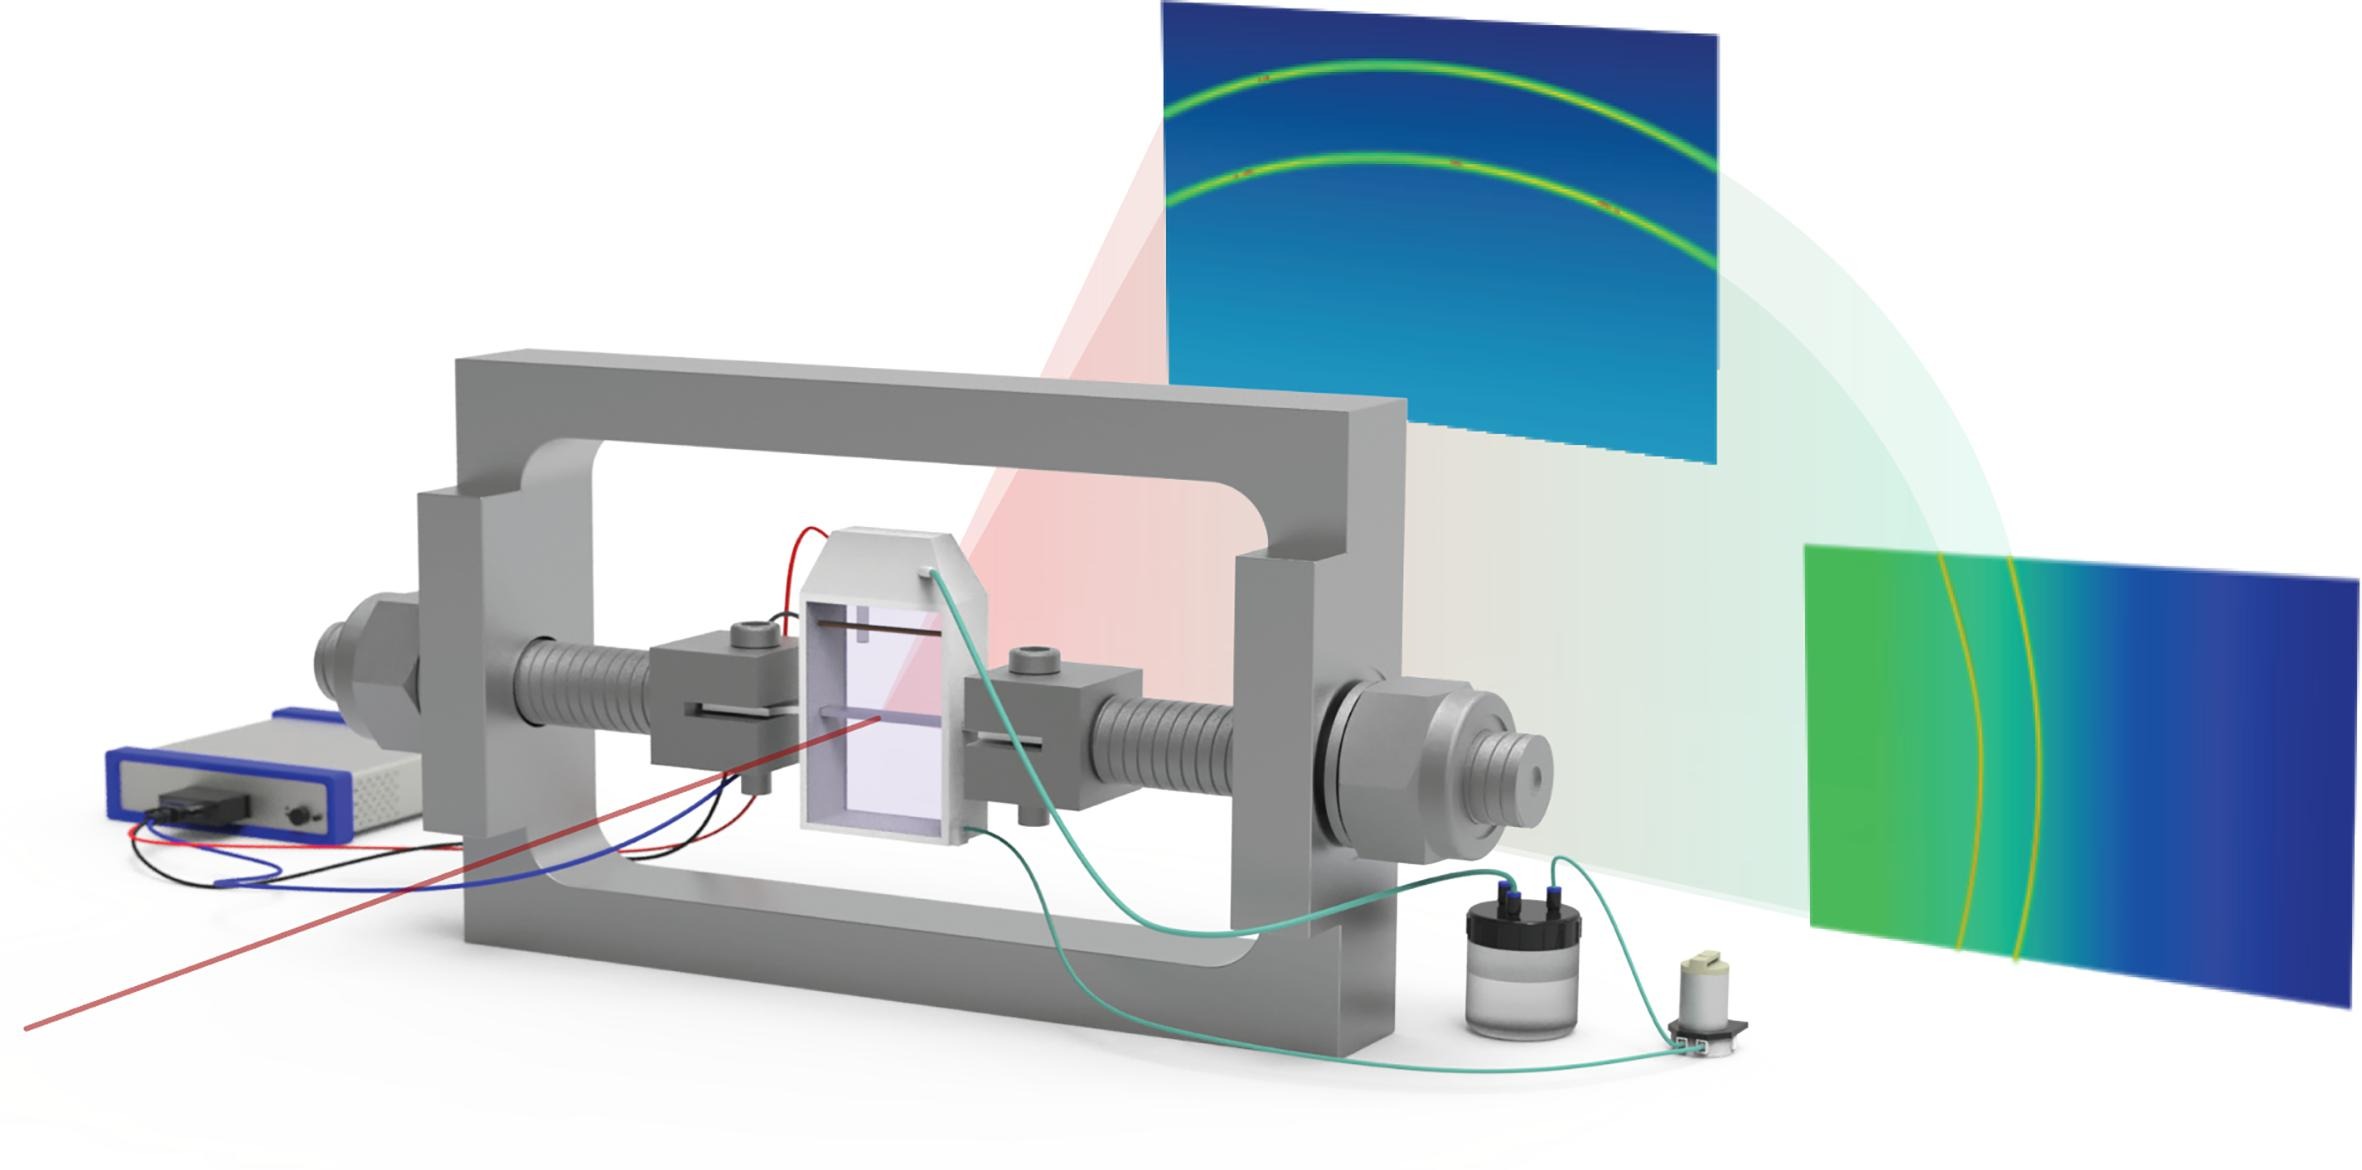 The experimental setup for operando synchrotron grazing-incidence x-ray diffraction measurements with in-situ electrochemical hydrogen charging.